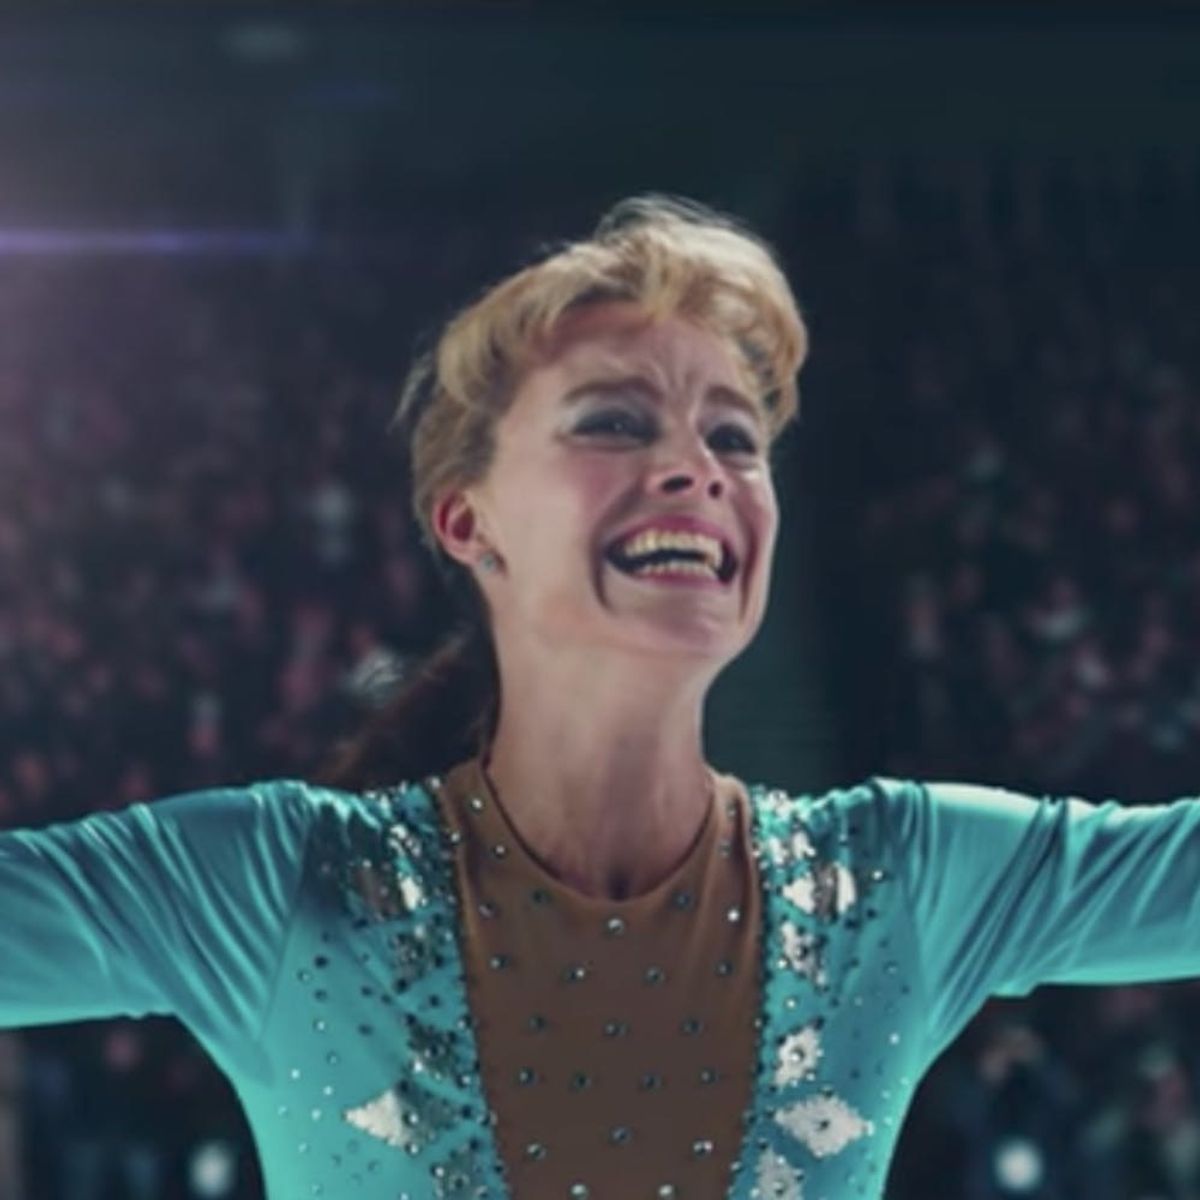 See Margot Robbie Take the Ice As Tonya Harding in the First “I, Tonya” Teaser Trailer